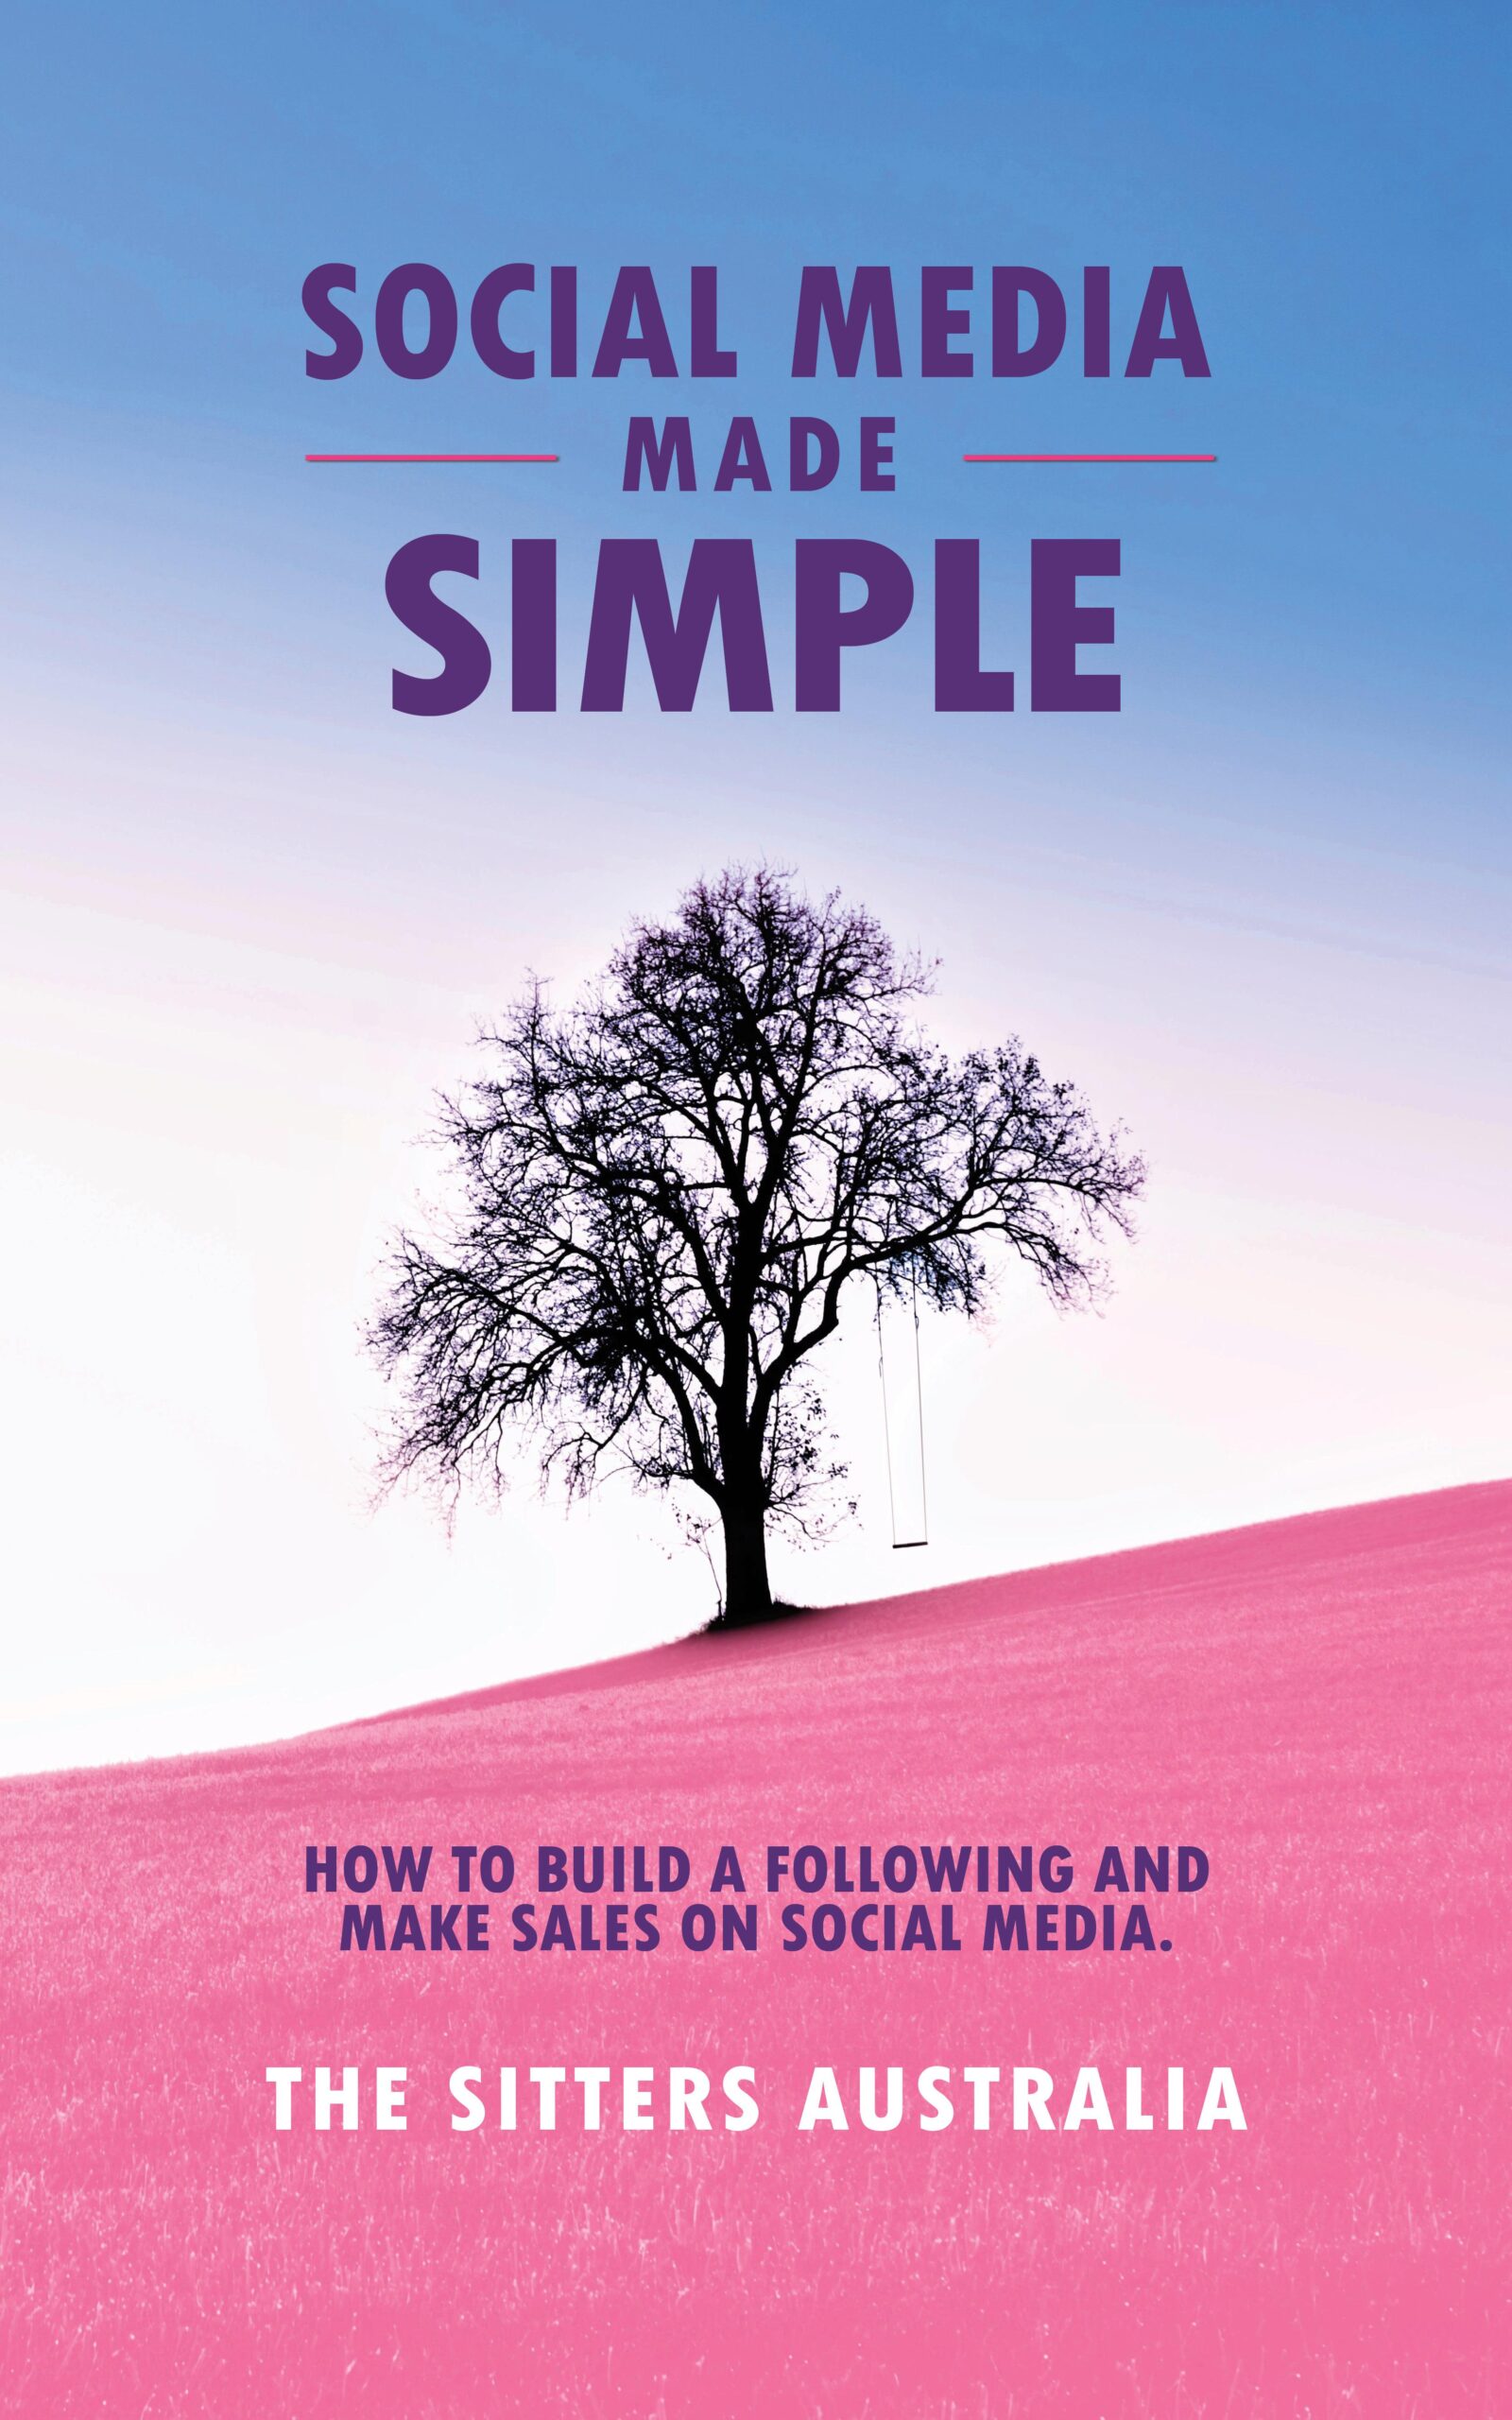 FREE: Social Media Made Simple by Sian Evans